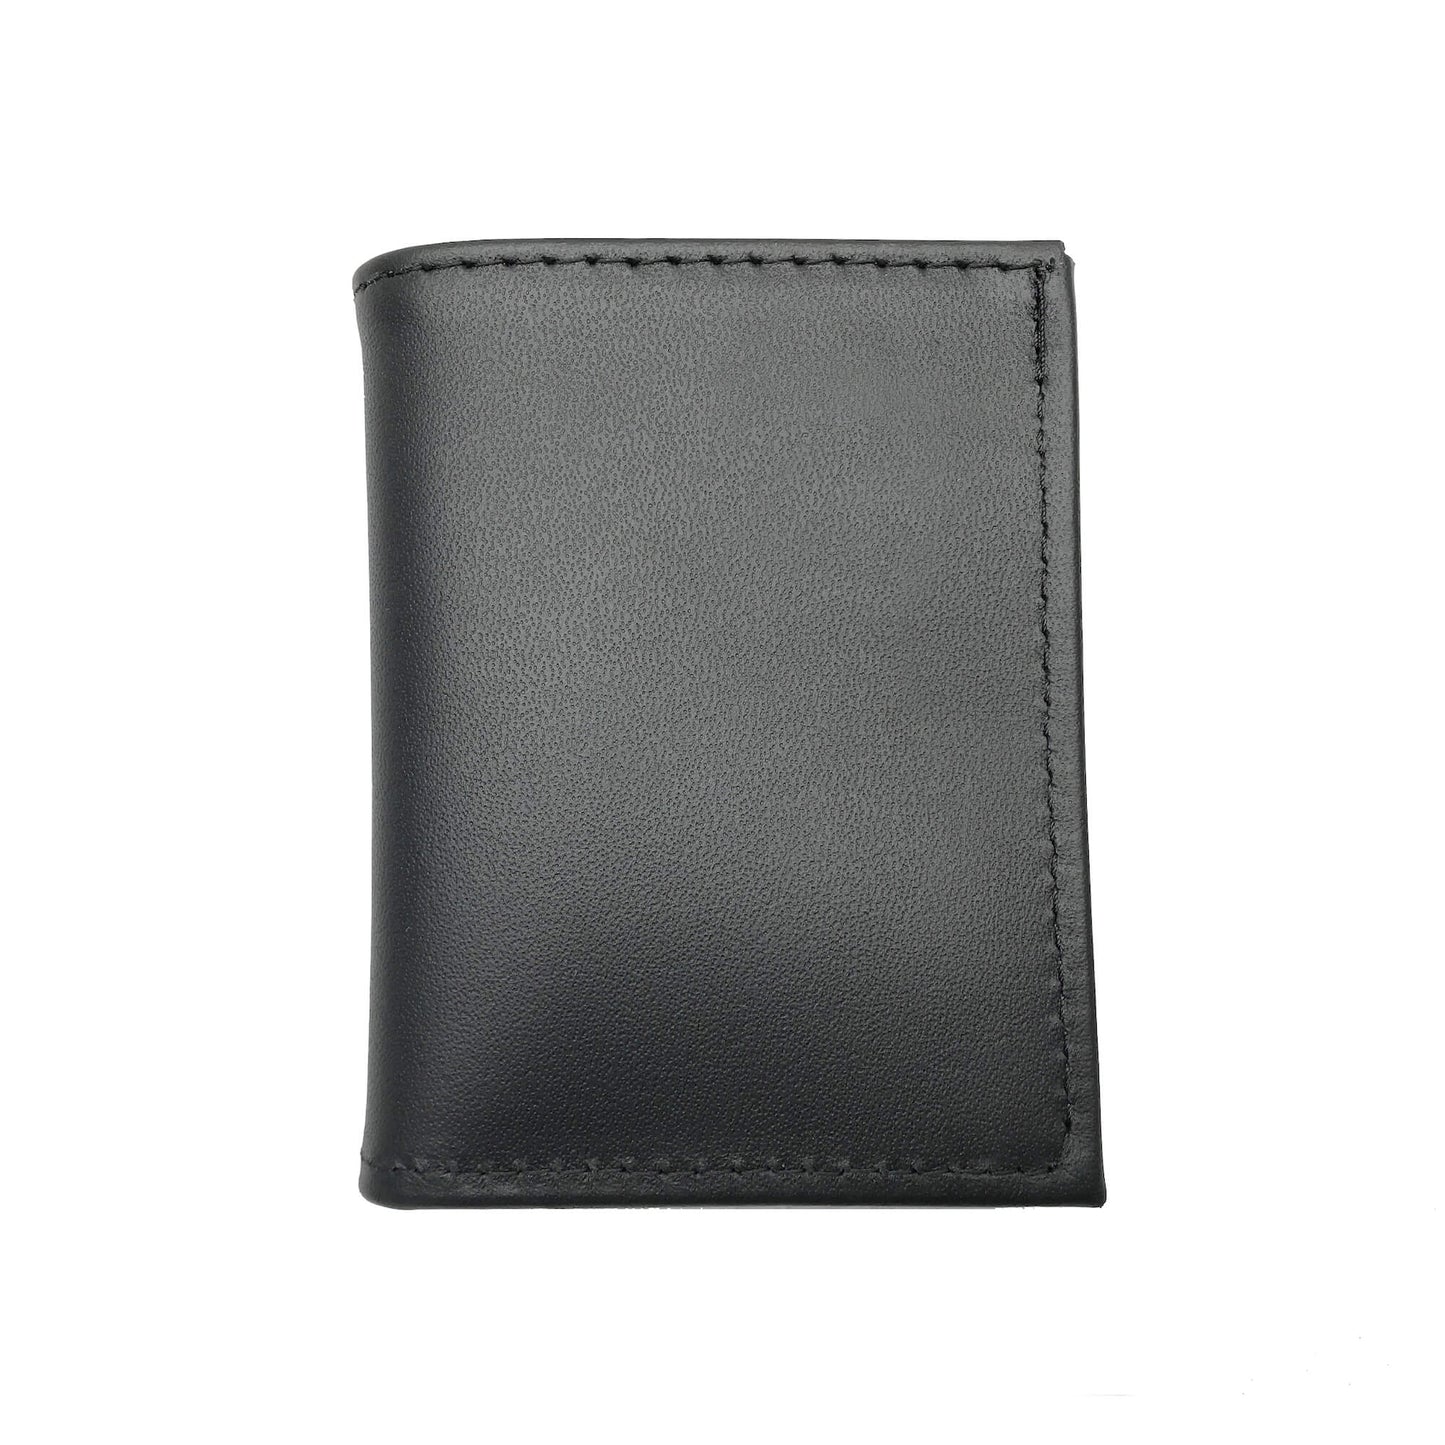 New York Police Department (NYPD) Captain Bifold Hidden Badge Wallet-Perfect Fit-911 Duty Gear USA